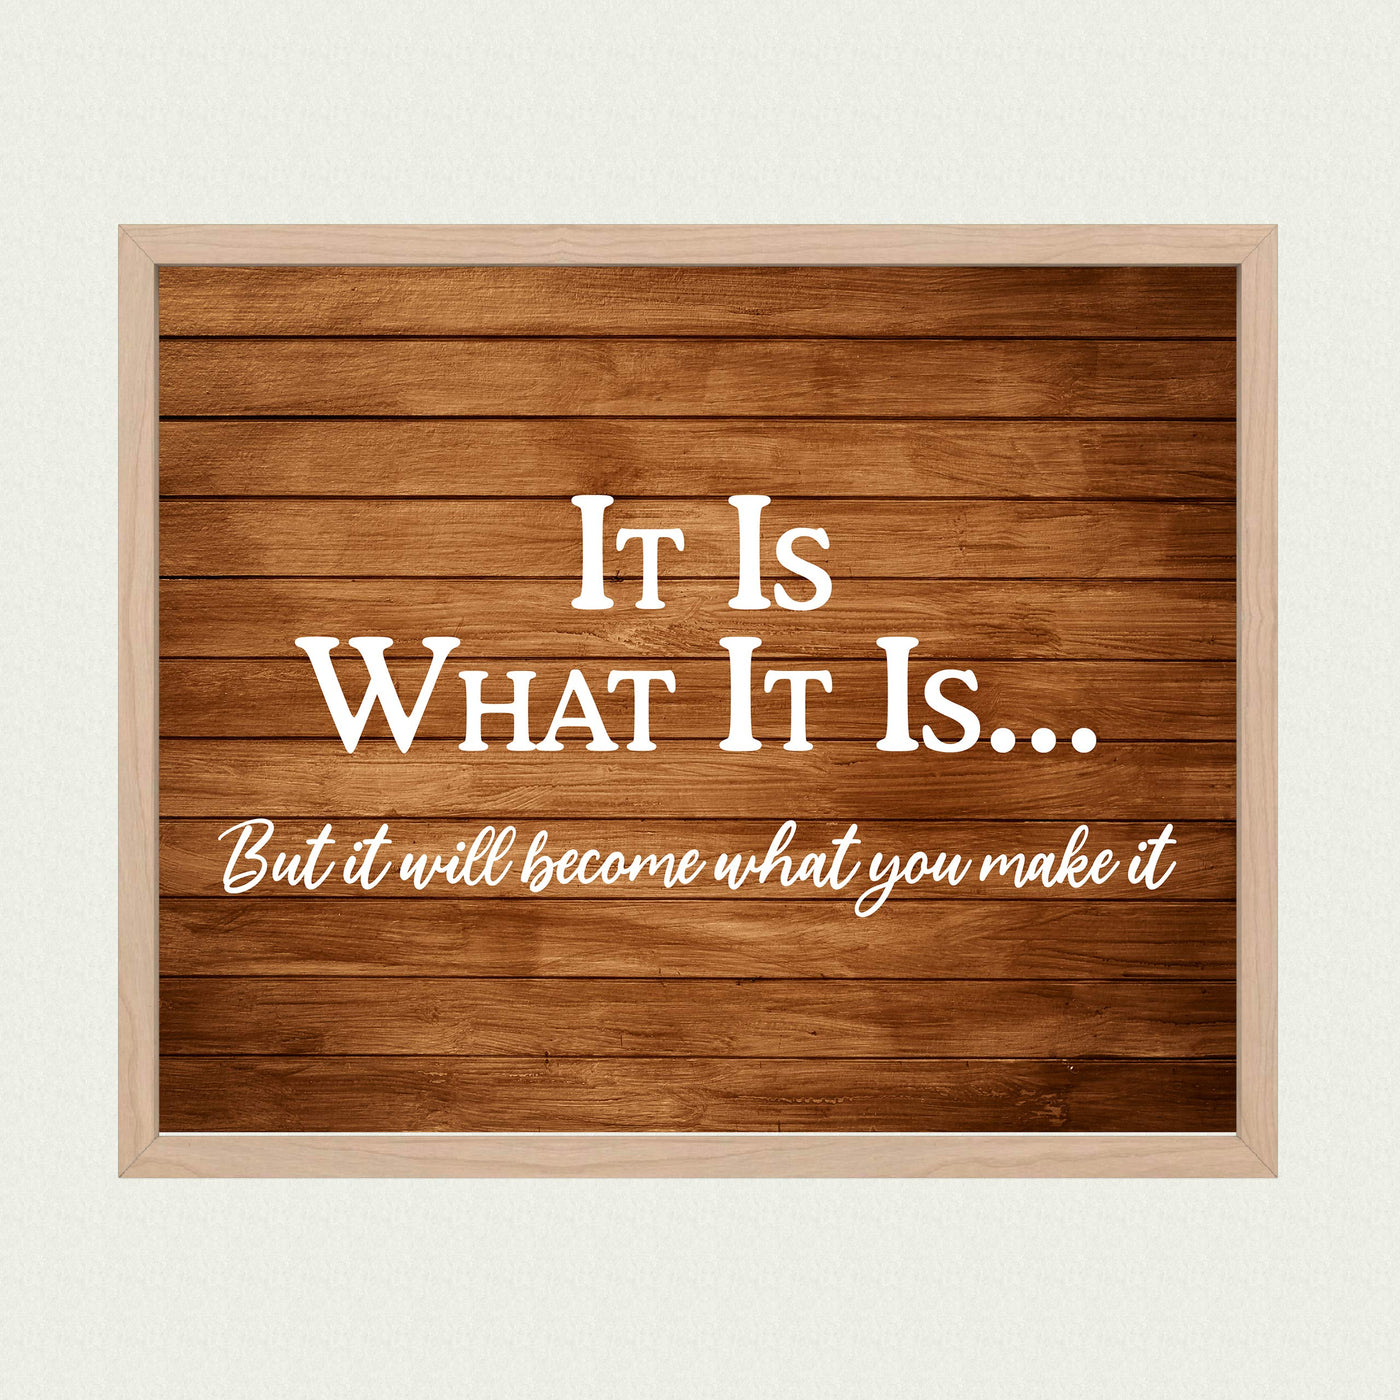 ?It Will Become What You Make It? Motivational Wall Art-10 x 8" Replica Wood Design Poster Print-Ready to Frame. Inspirational Home-Office-School-Dorm Decor. Perfect for Motivation! Printed on Paper.